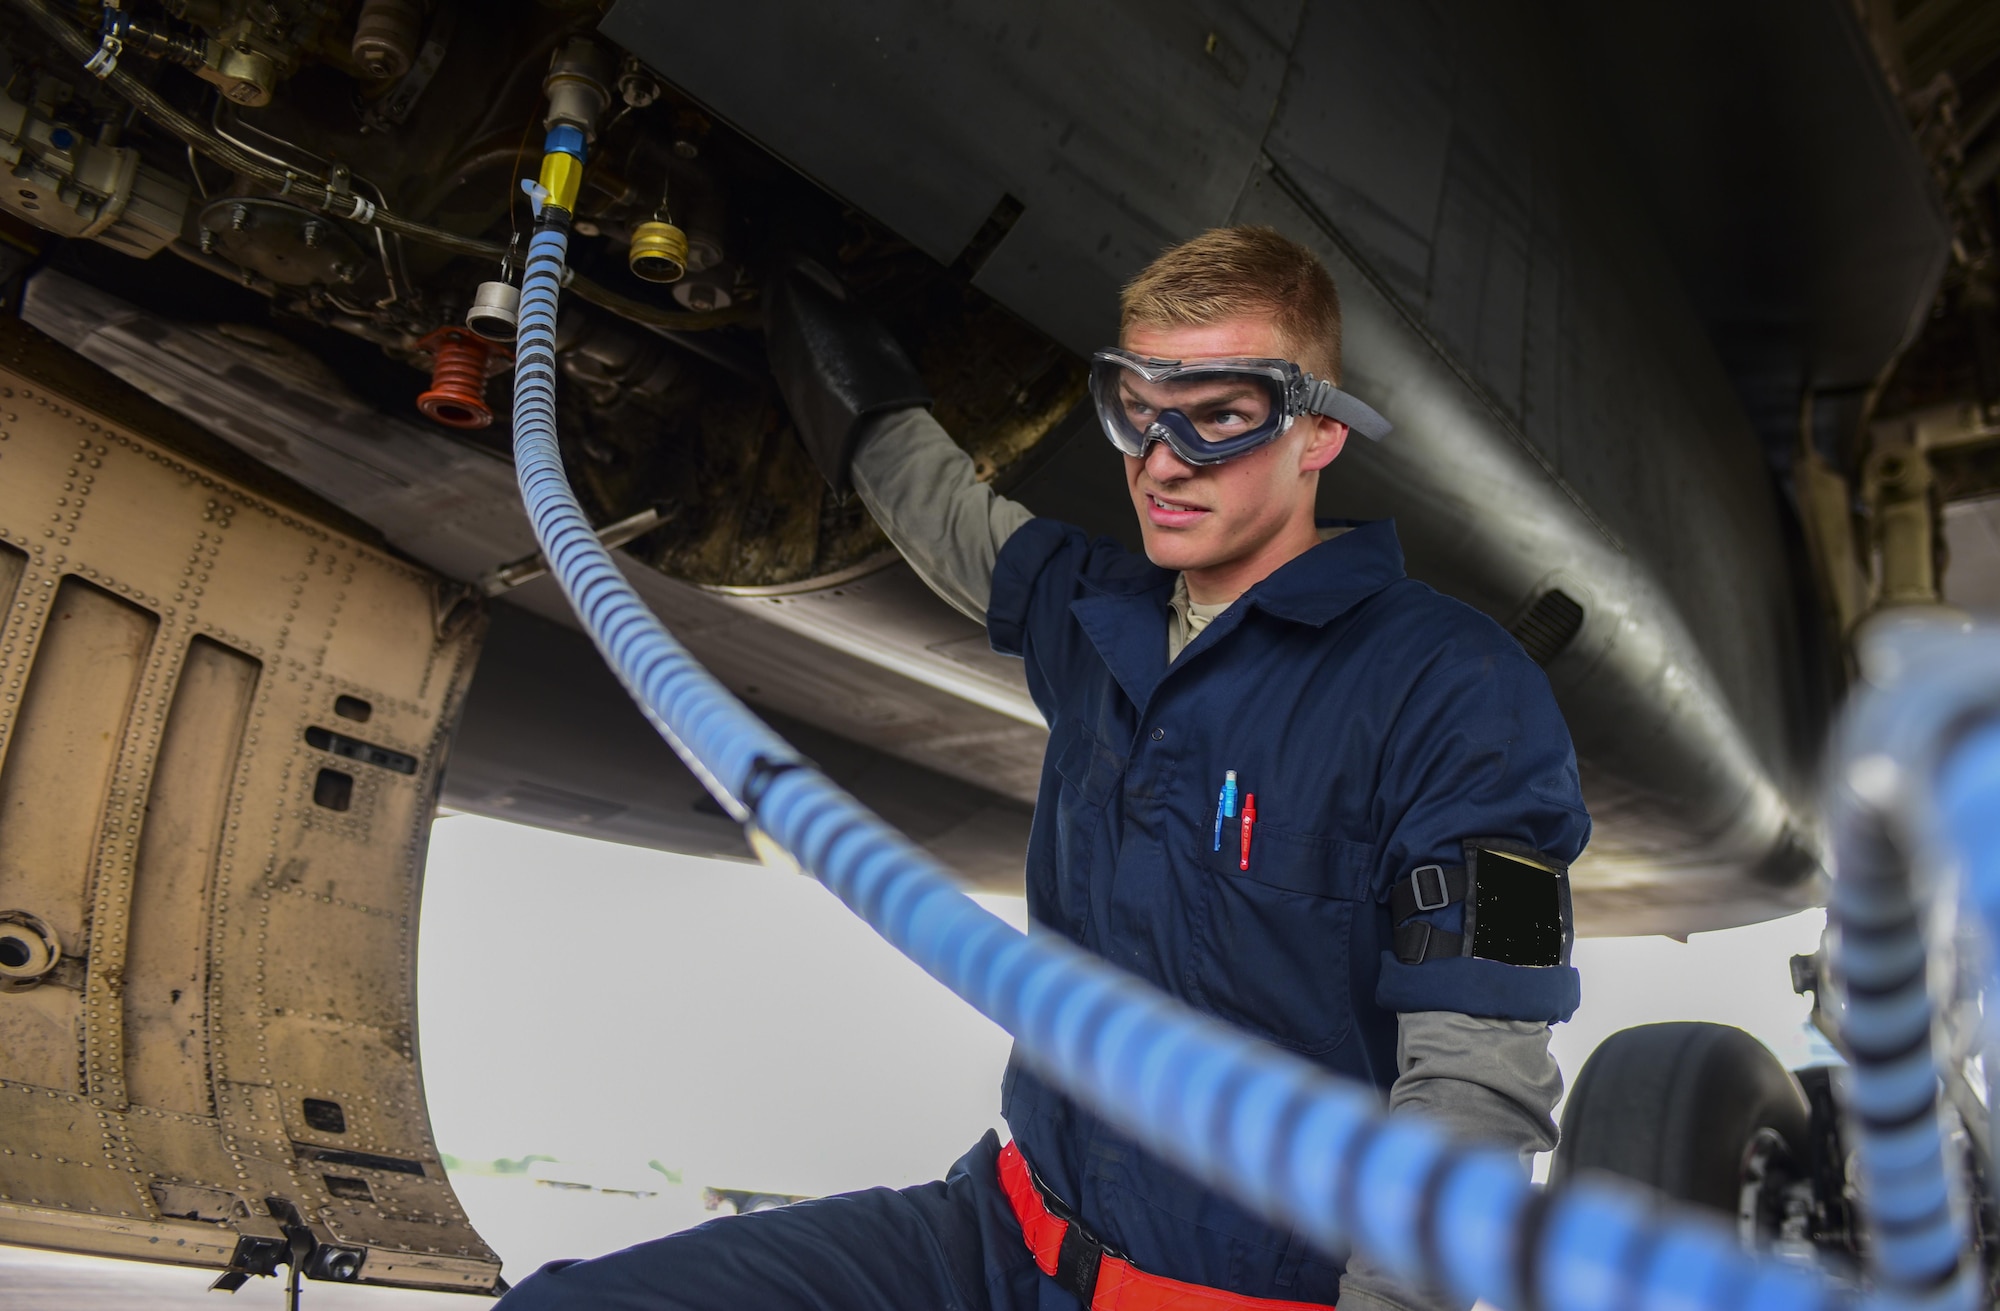 U.S. Air Force Airman 1st Class John Parker, 28th Aircraft Maintenance Squadron assistant dedicated crew chief, services the oil on a B-1B Lancer from Ellsworth Air Force Base at Royal Air Force Fairford, U.K., June 7, 2017. Airmen from the 28th Aircraft Maintenance Squadron are supporting bomber assurance and deterrence missions in the European theatre that combine training opportunities and improve interoperability among participating NATO allies and regional partners. (U.S. Air Force photo by Airman 1st Class Randahl J. Jenson)